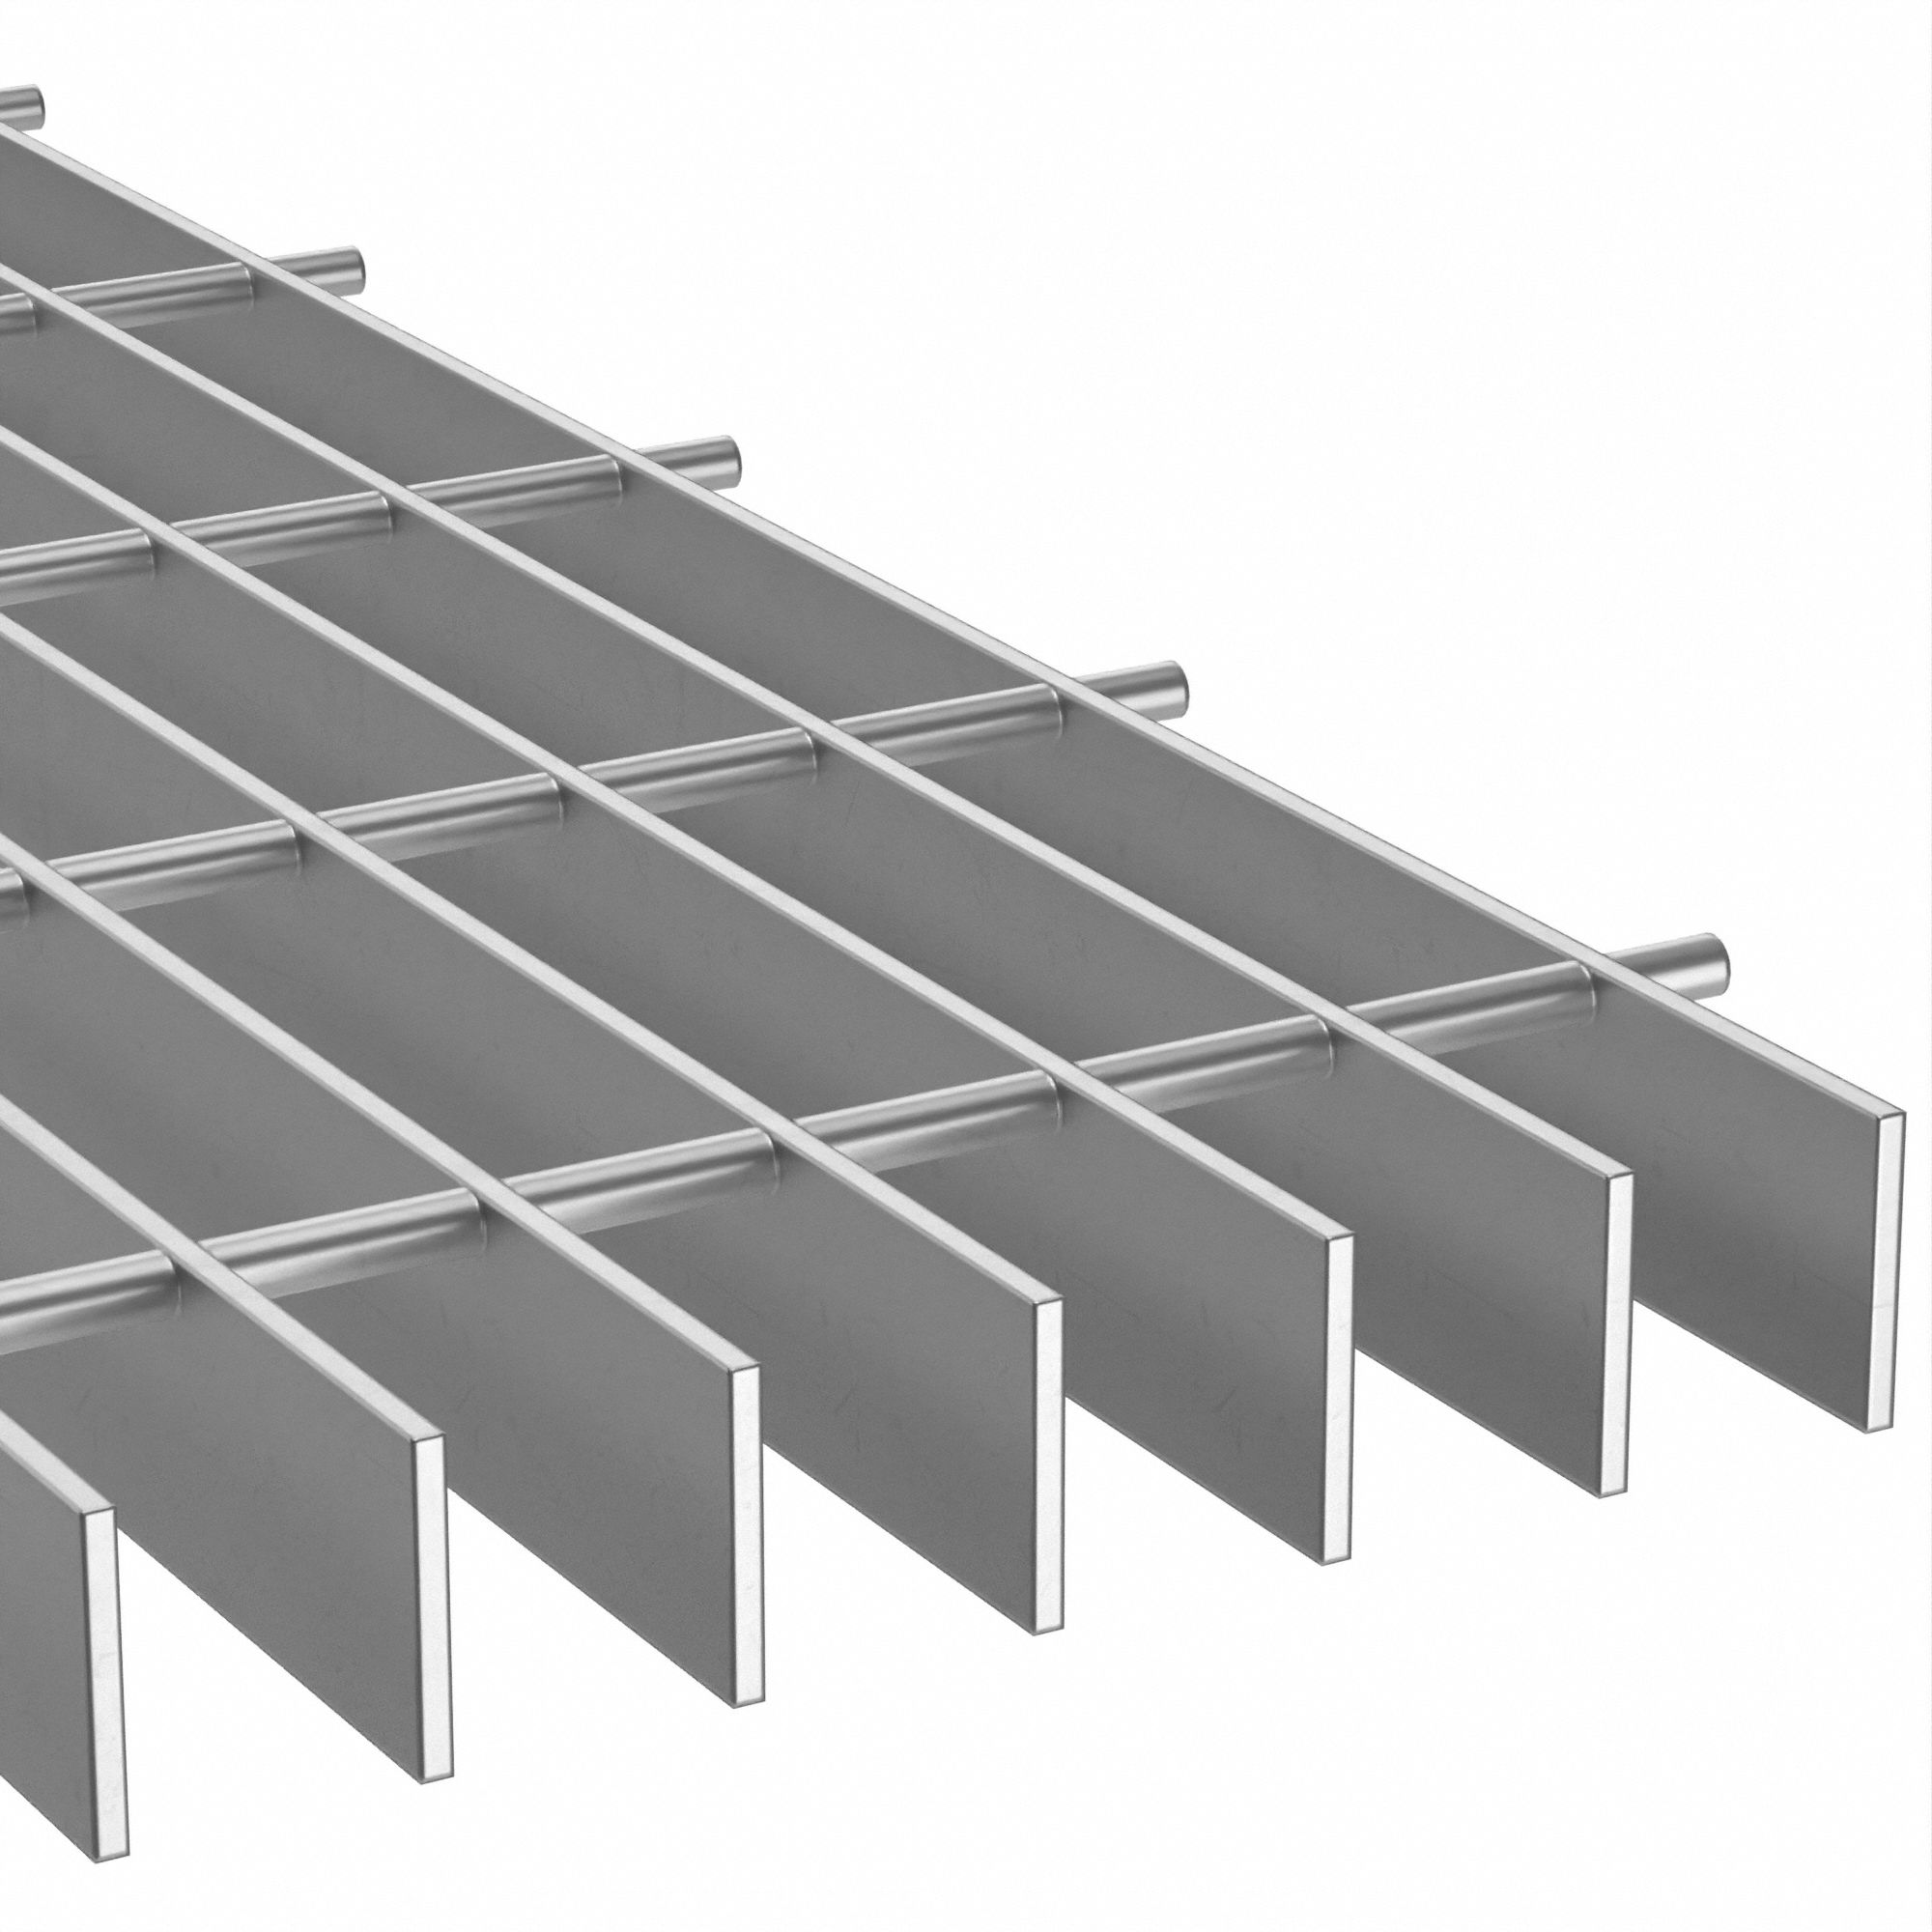 Bar Grating: Aluminum, 1 in Overall Ht, 36 in Overall Lg, 36 in Overall Wd,  4 in Cross Bar Spacing